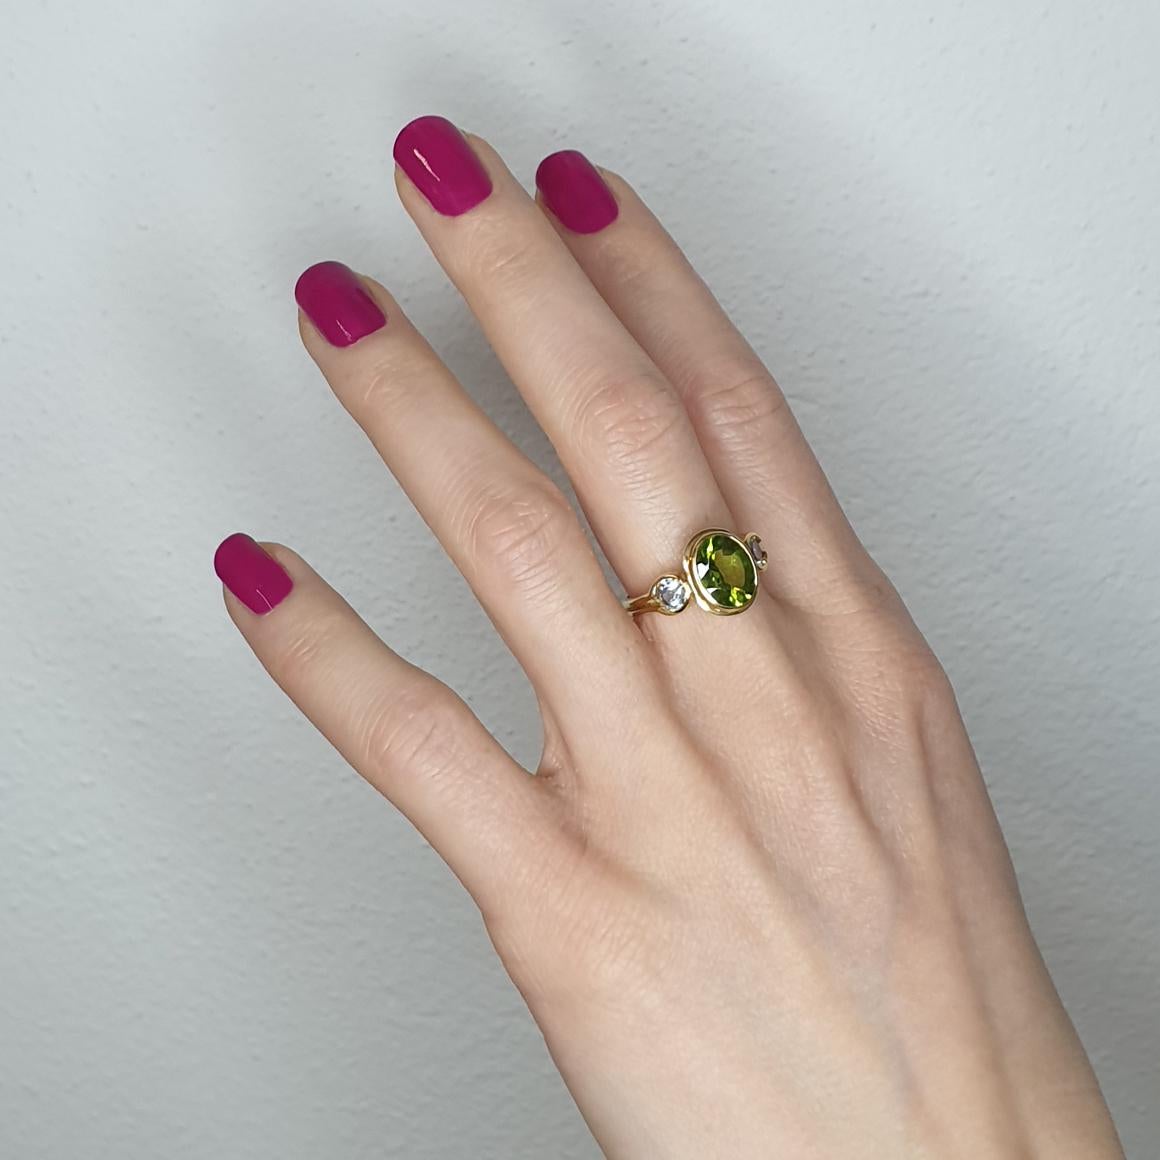 Ring in 18k yellow gold with Peridot (oval cut, size:8x10 mm) and Blue Topaz (round cut, size:4 mm)

Size of ring:  15 EU -  8 USA   g.5.80

All Stanoppi Jewelry is new and has never been previously owned or worn. Each item will arrive at your door